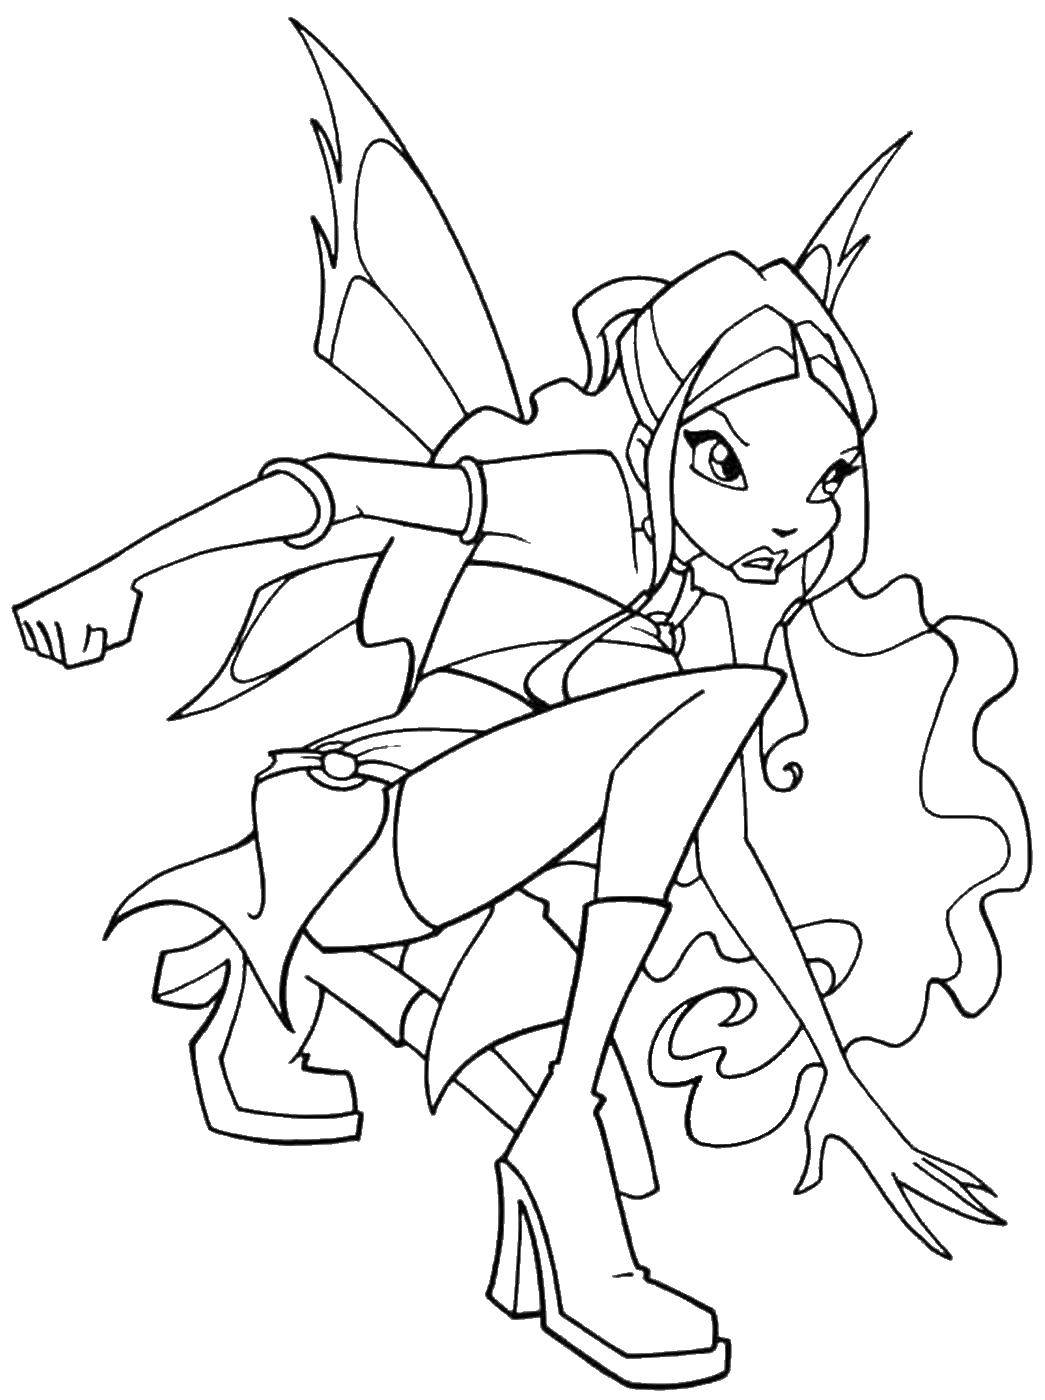 Coloring Formidable Leila. Category Winx. Tags:  Character cartoon, Winx.